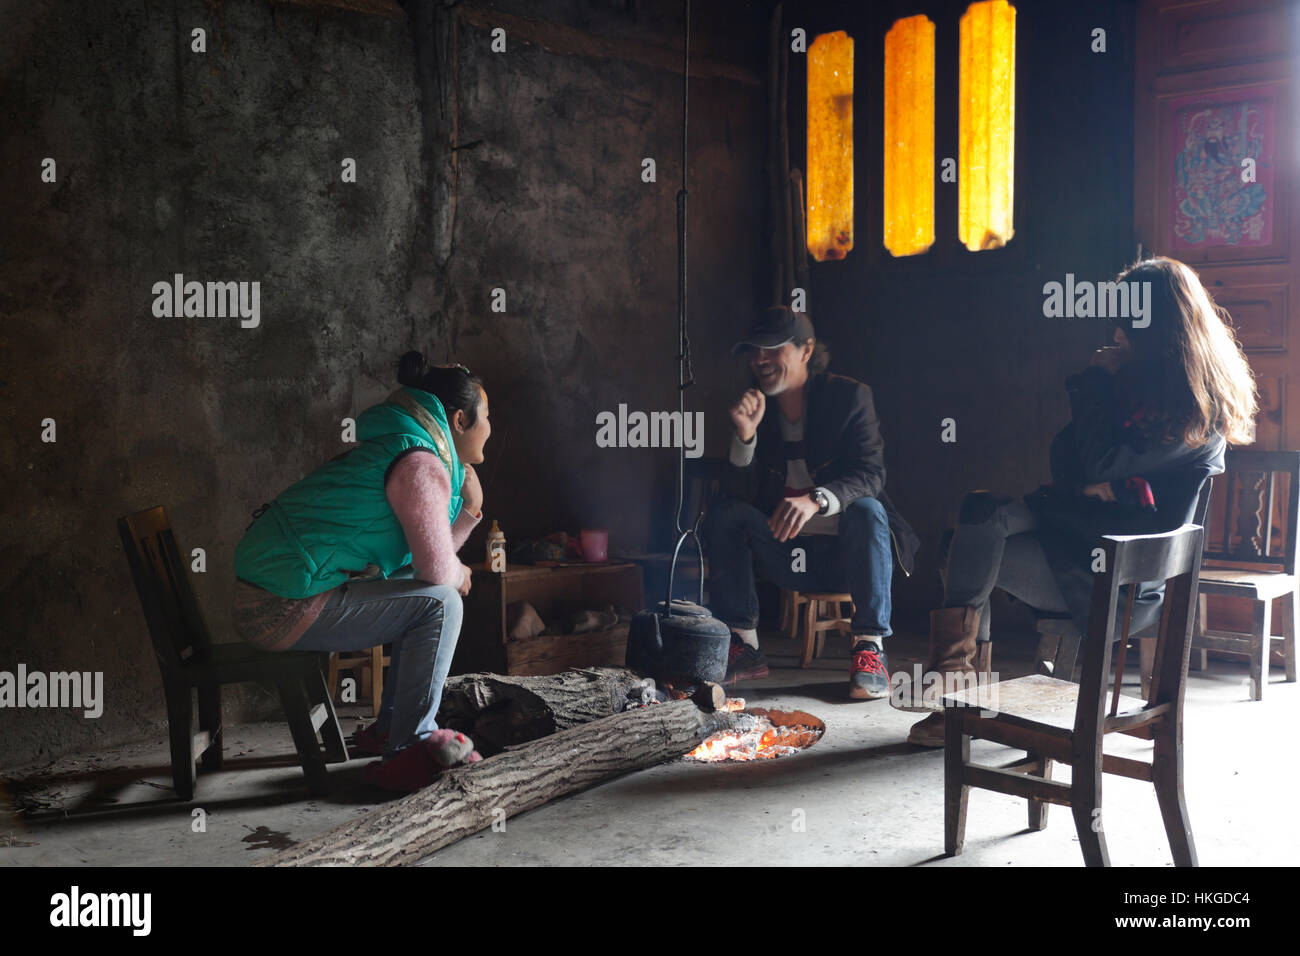 Guests at a farmhouse in a village in the mountains of west China sit in the living room with their host around an open log fire for warmth. Stock Photo